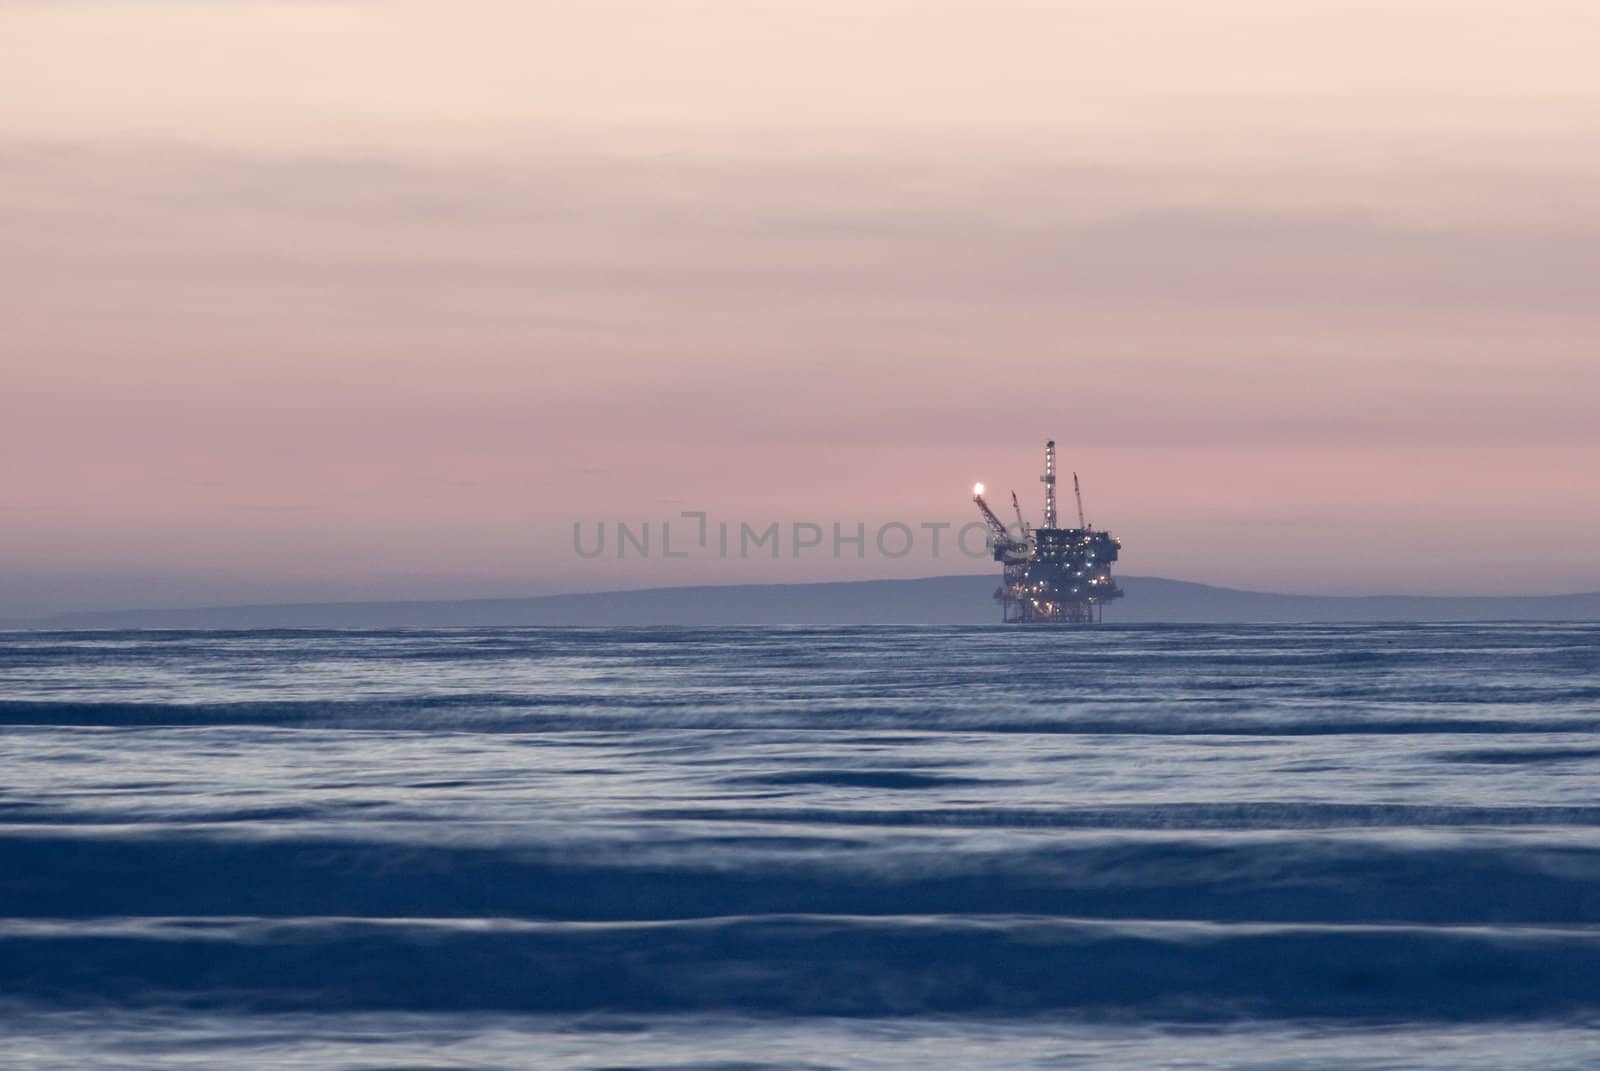 and off shore oil drilling platform at sunset